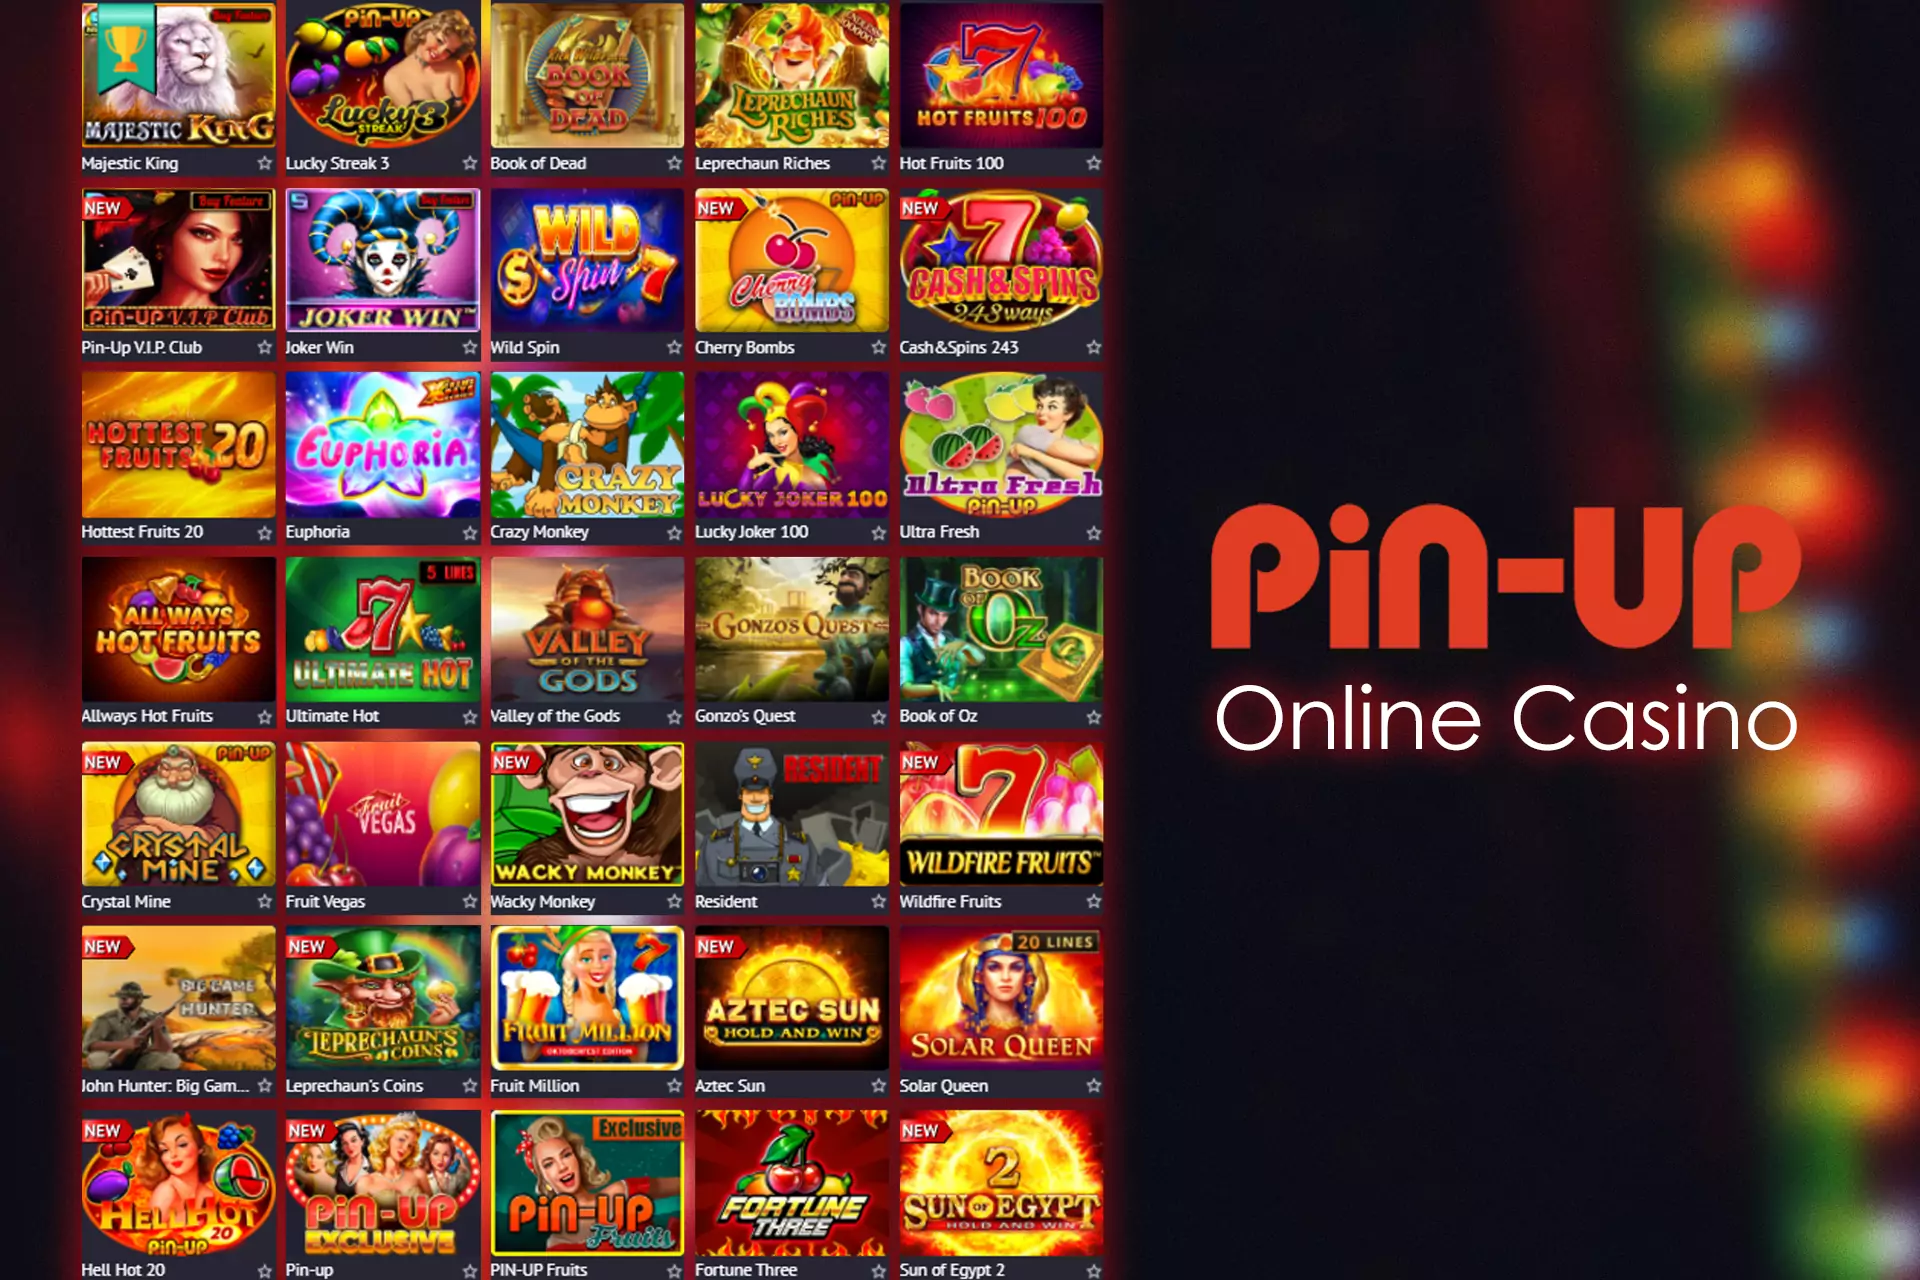 In the Casino section, you can play slots and other online games.